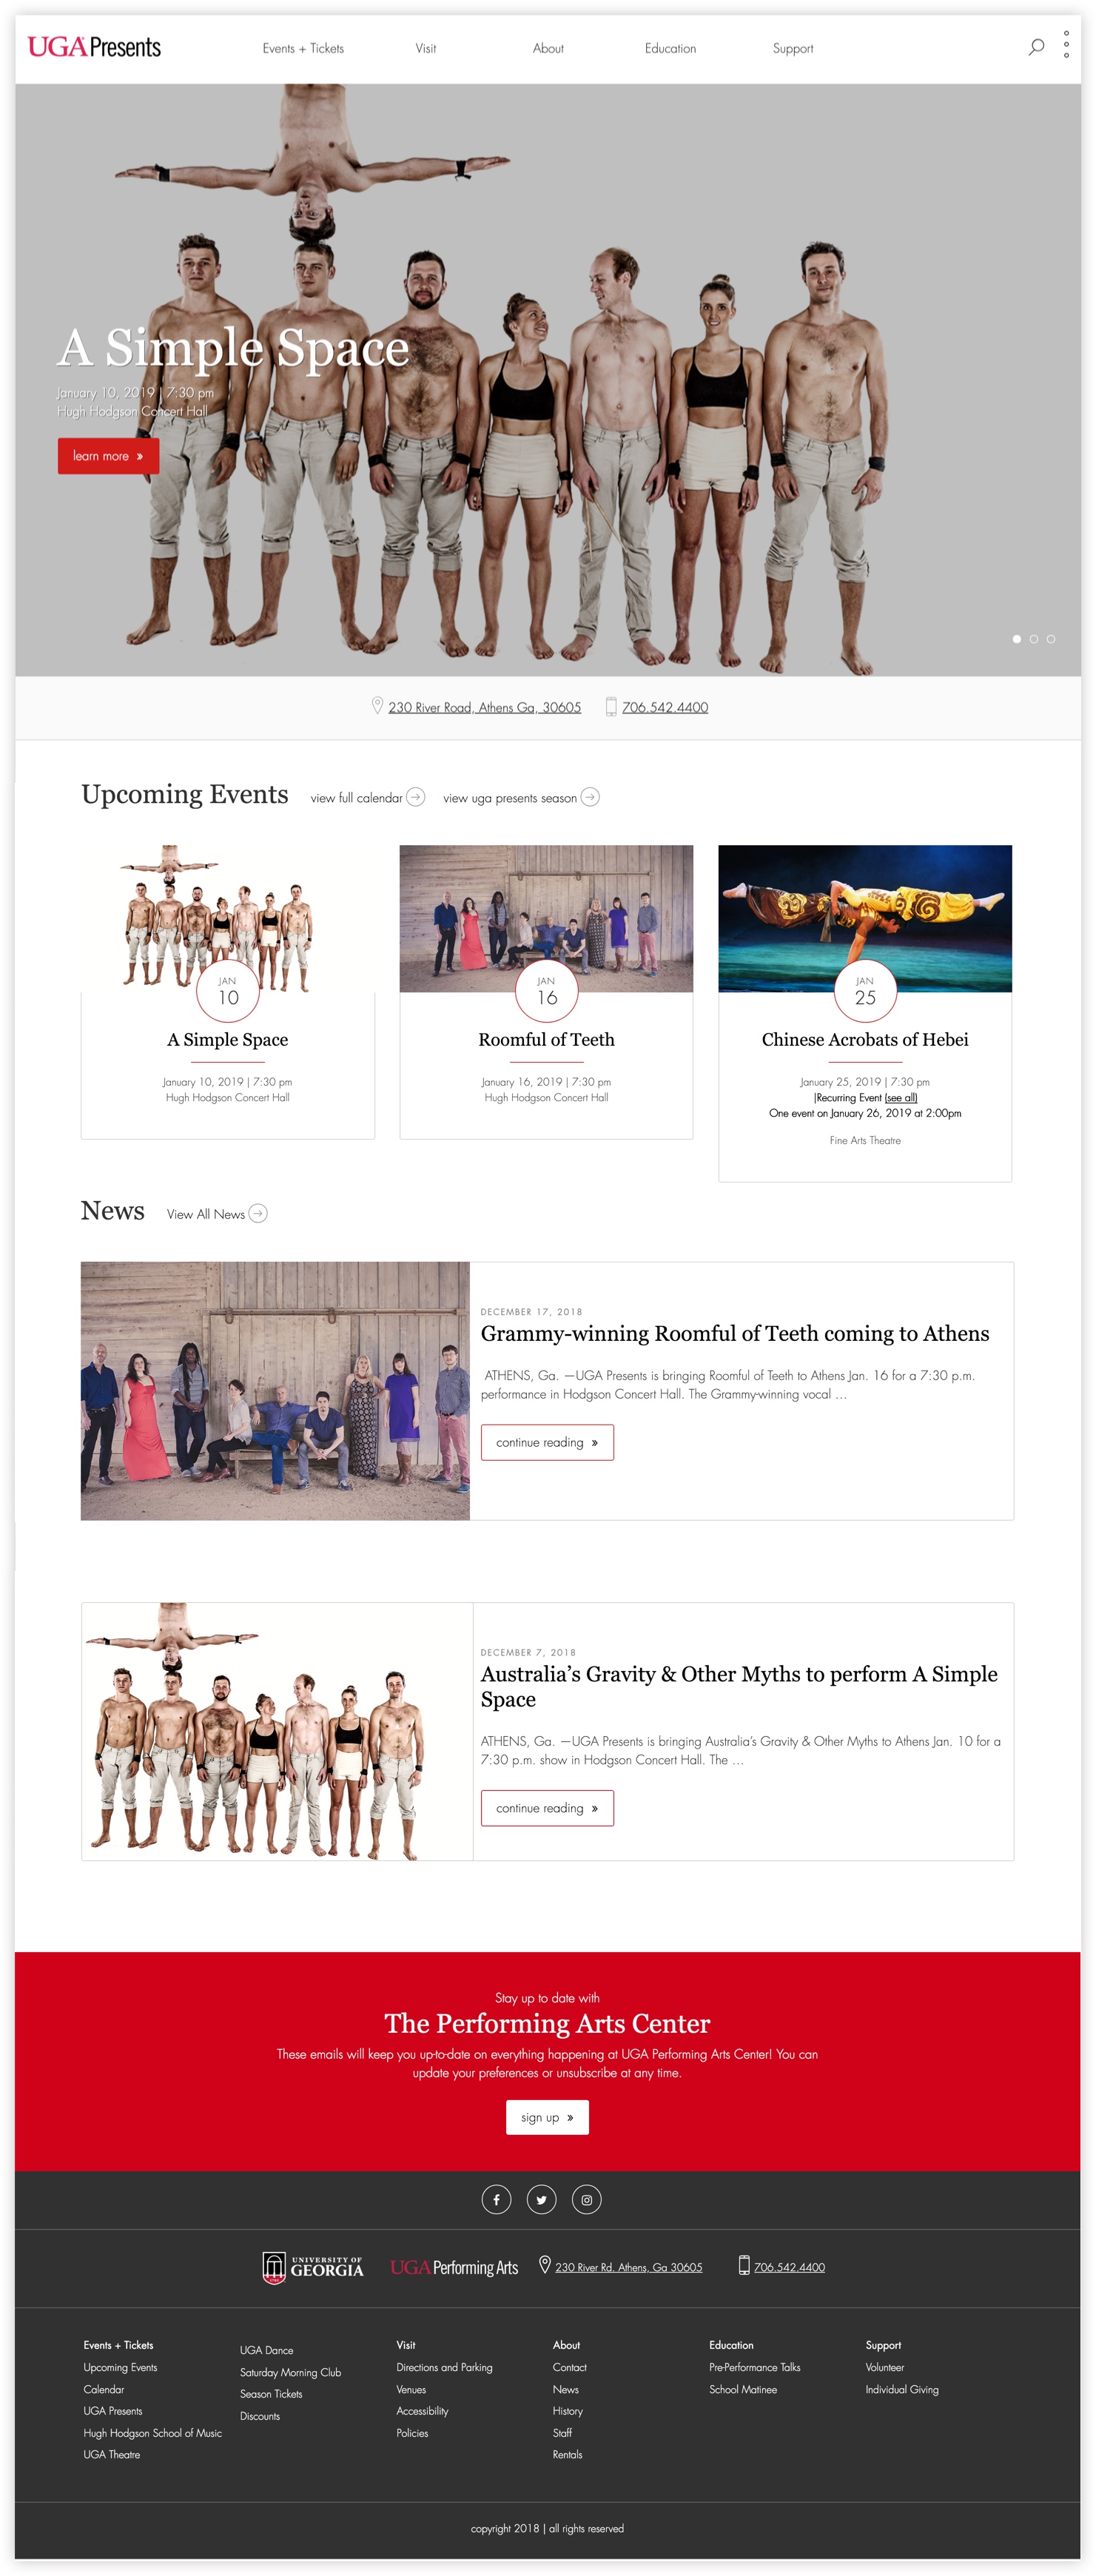 UGA Performing Arts Center home page